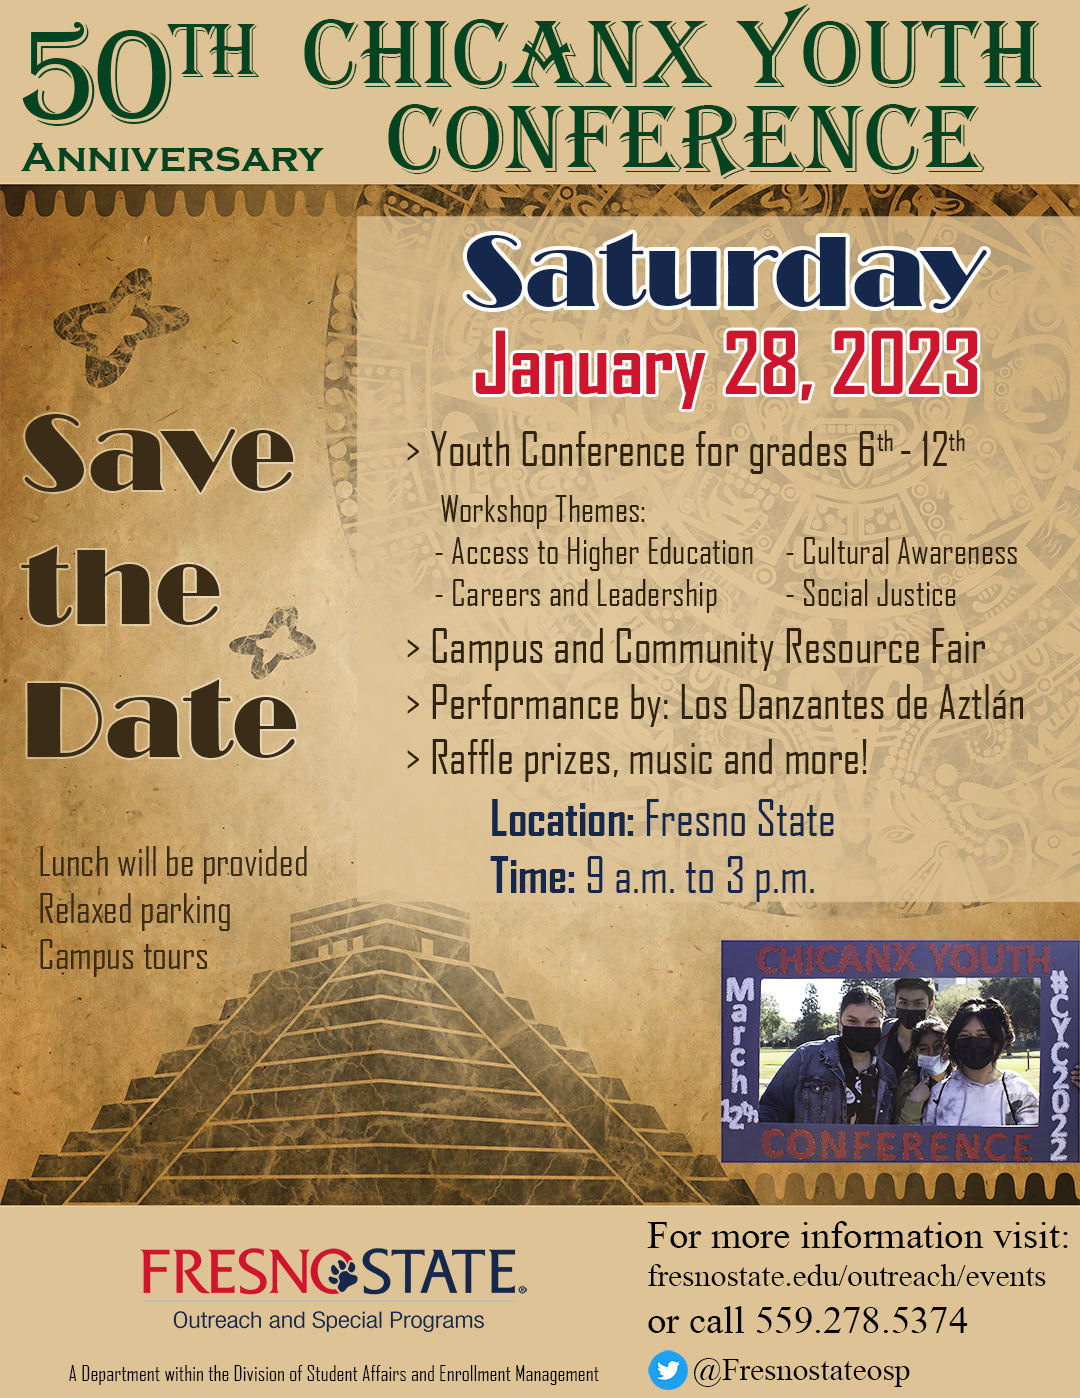 chicano youth conference flyer